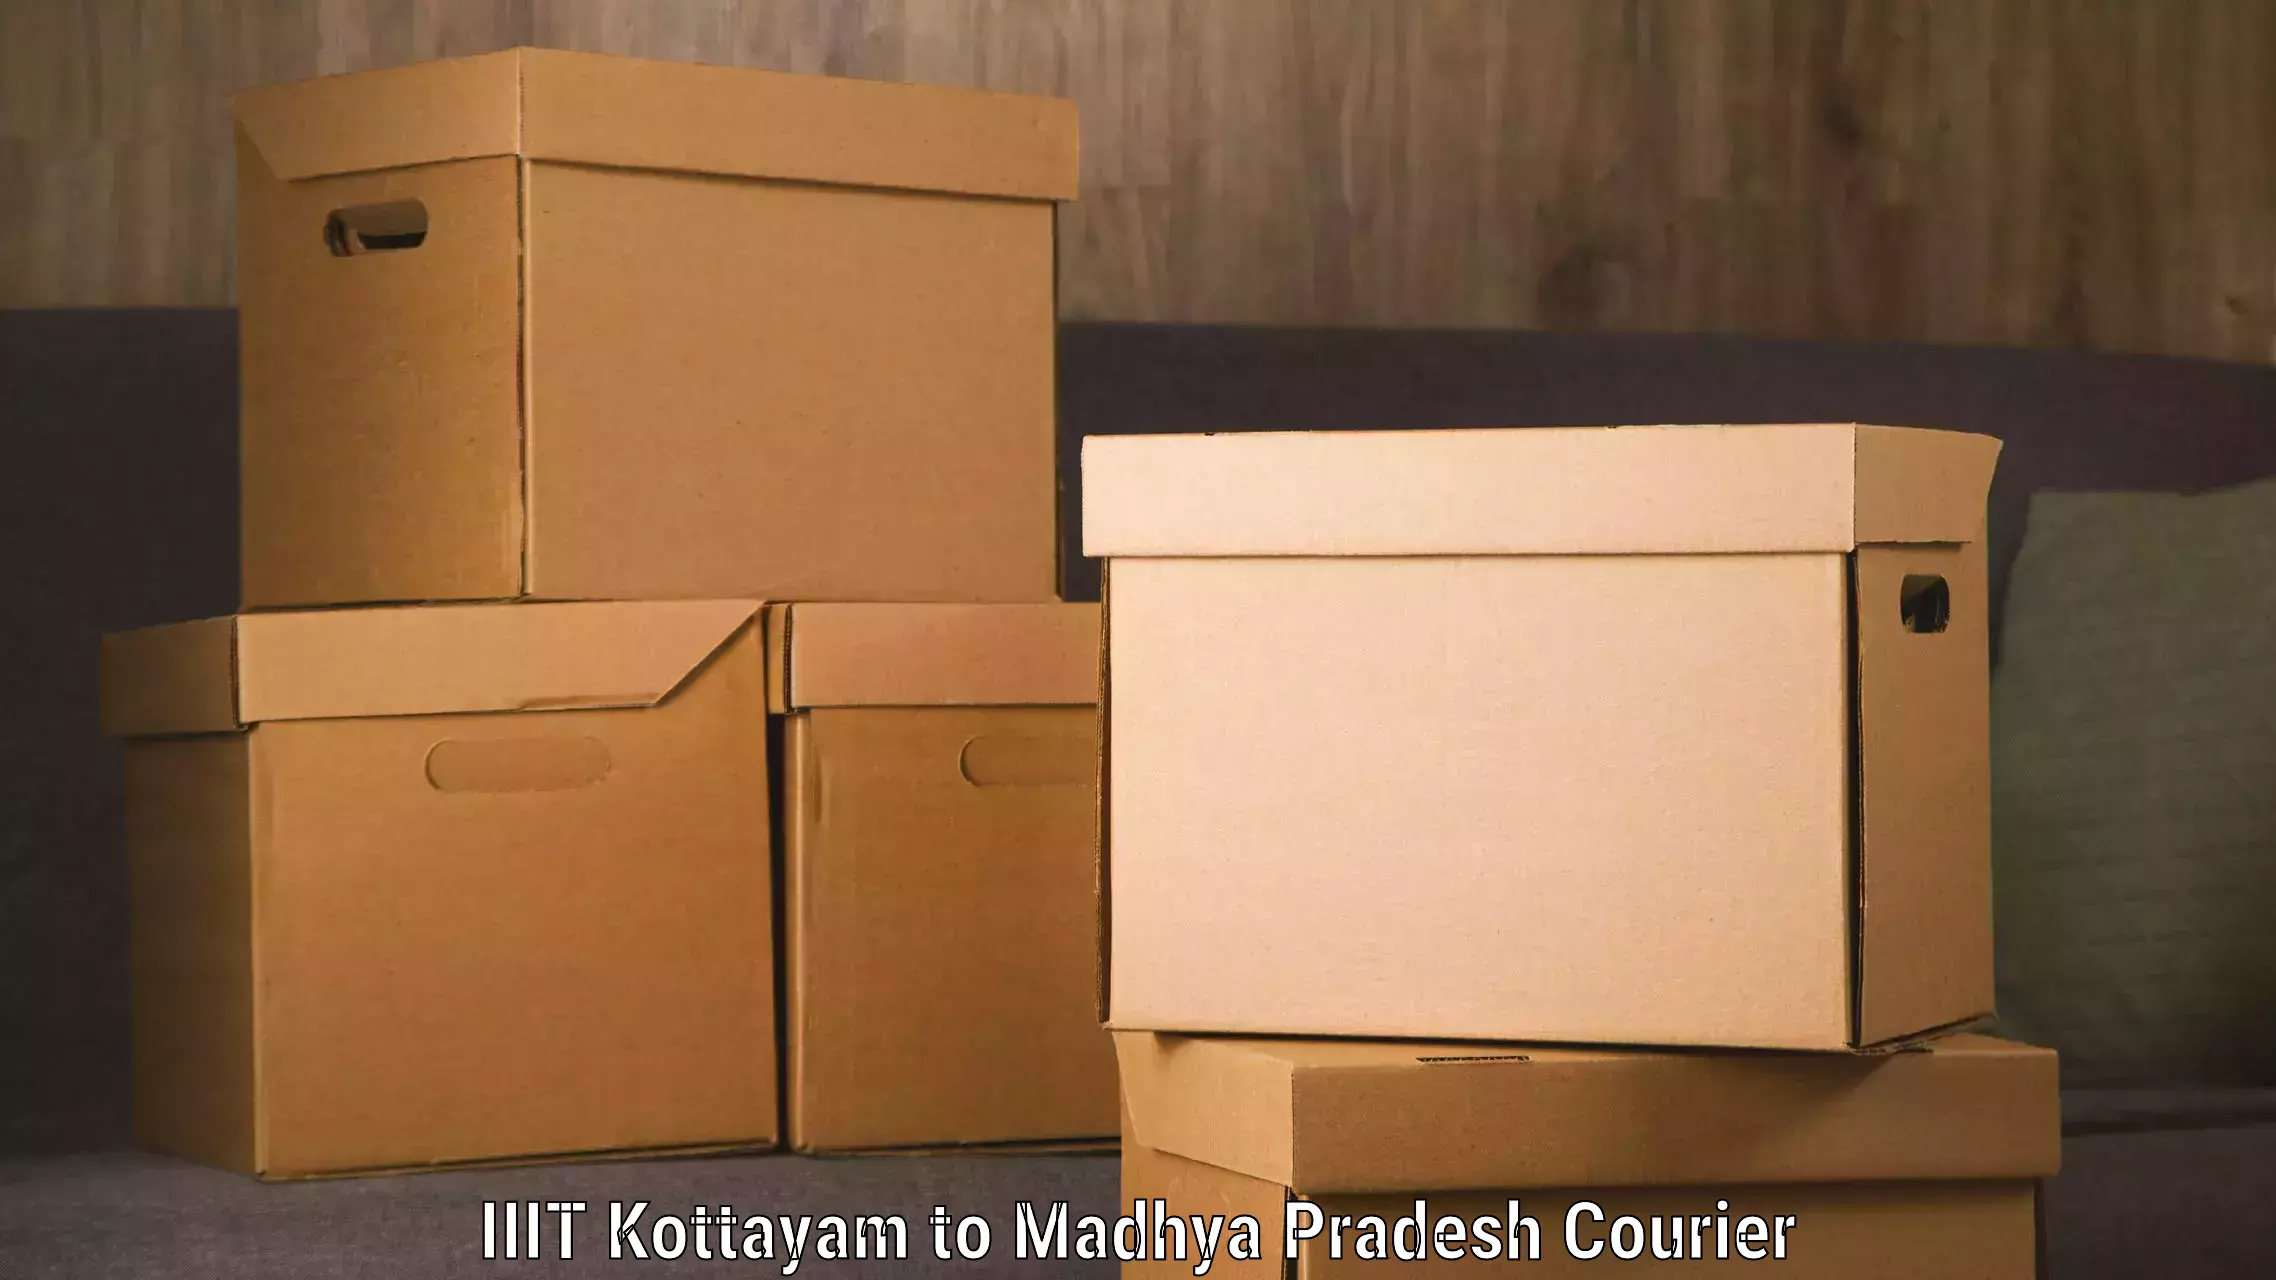 Express delivery network in IIIT Kottayam to Indore